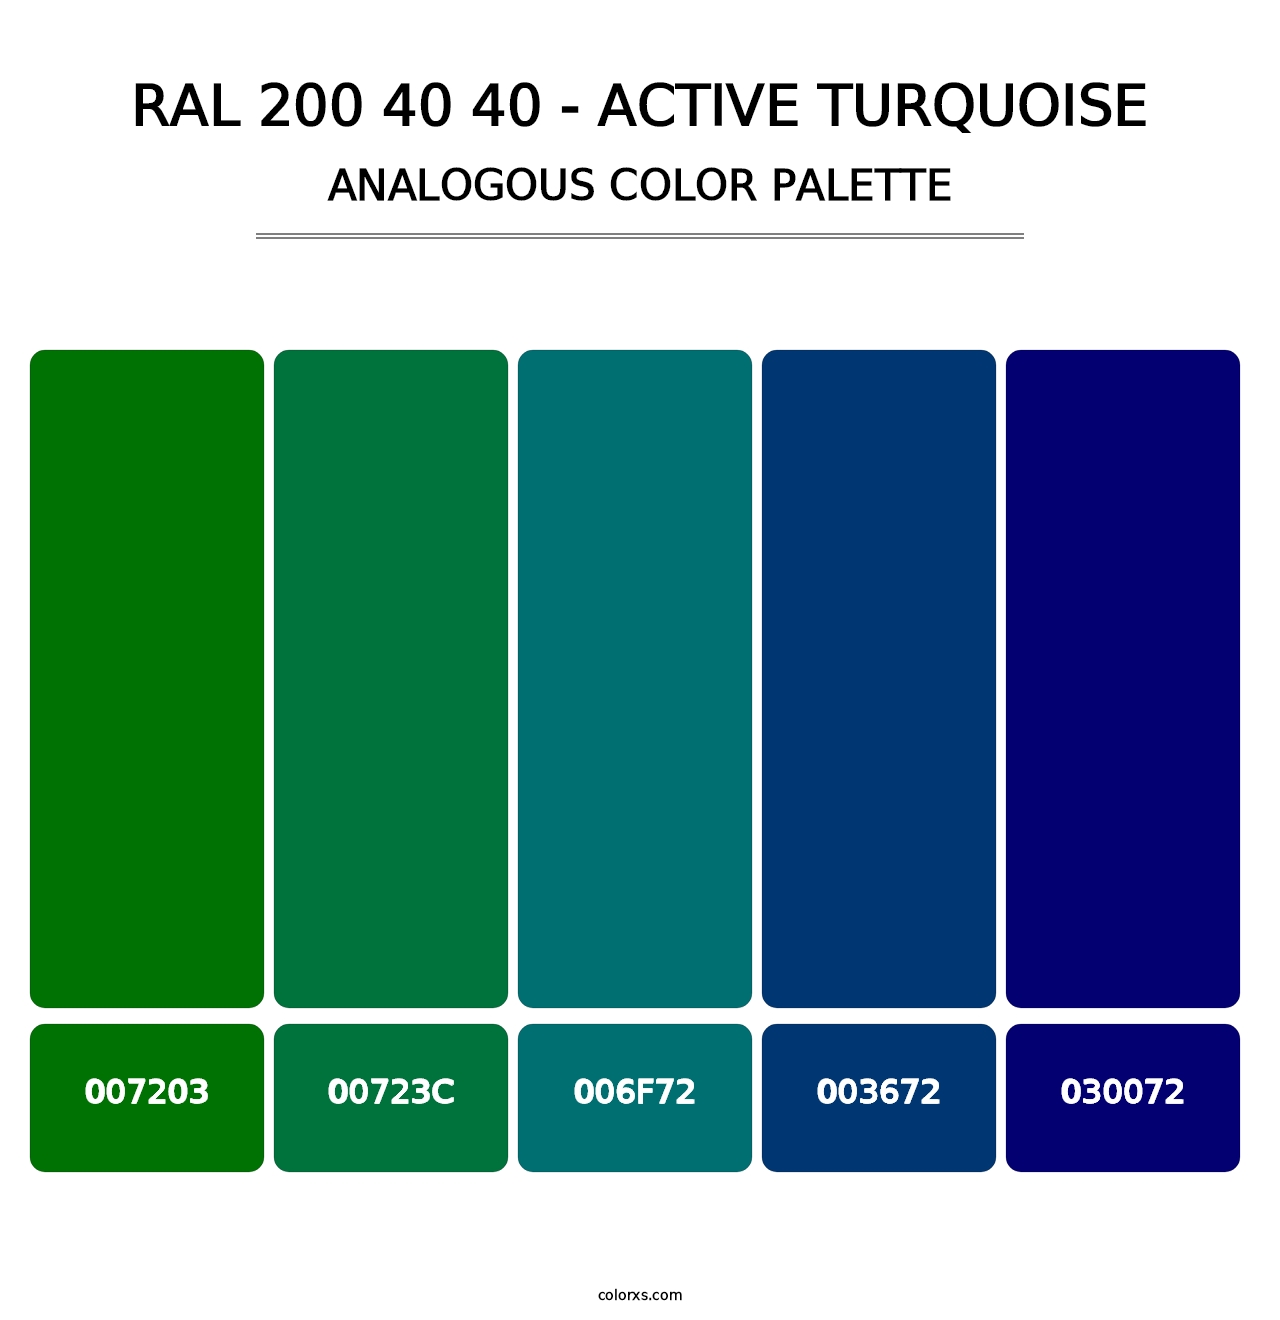 RAL 200 40 40 - Active Turquoise - Analogous Color Palette